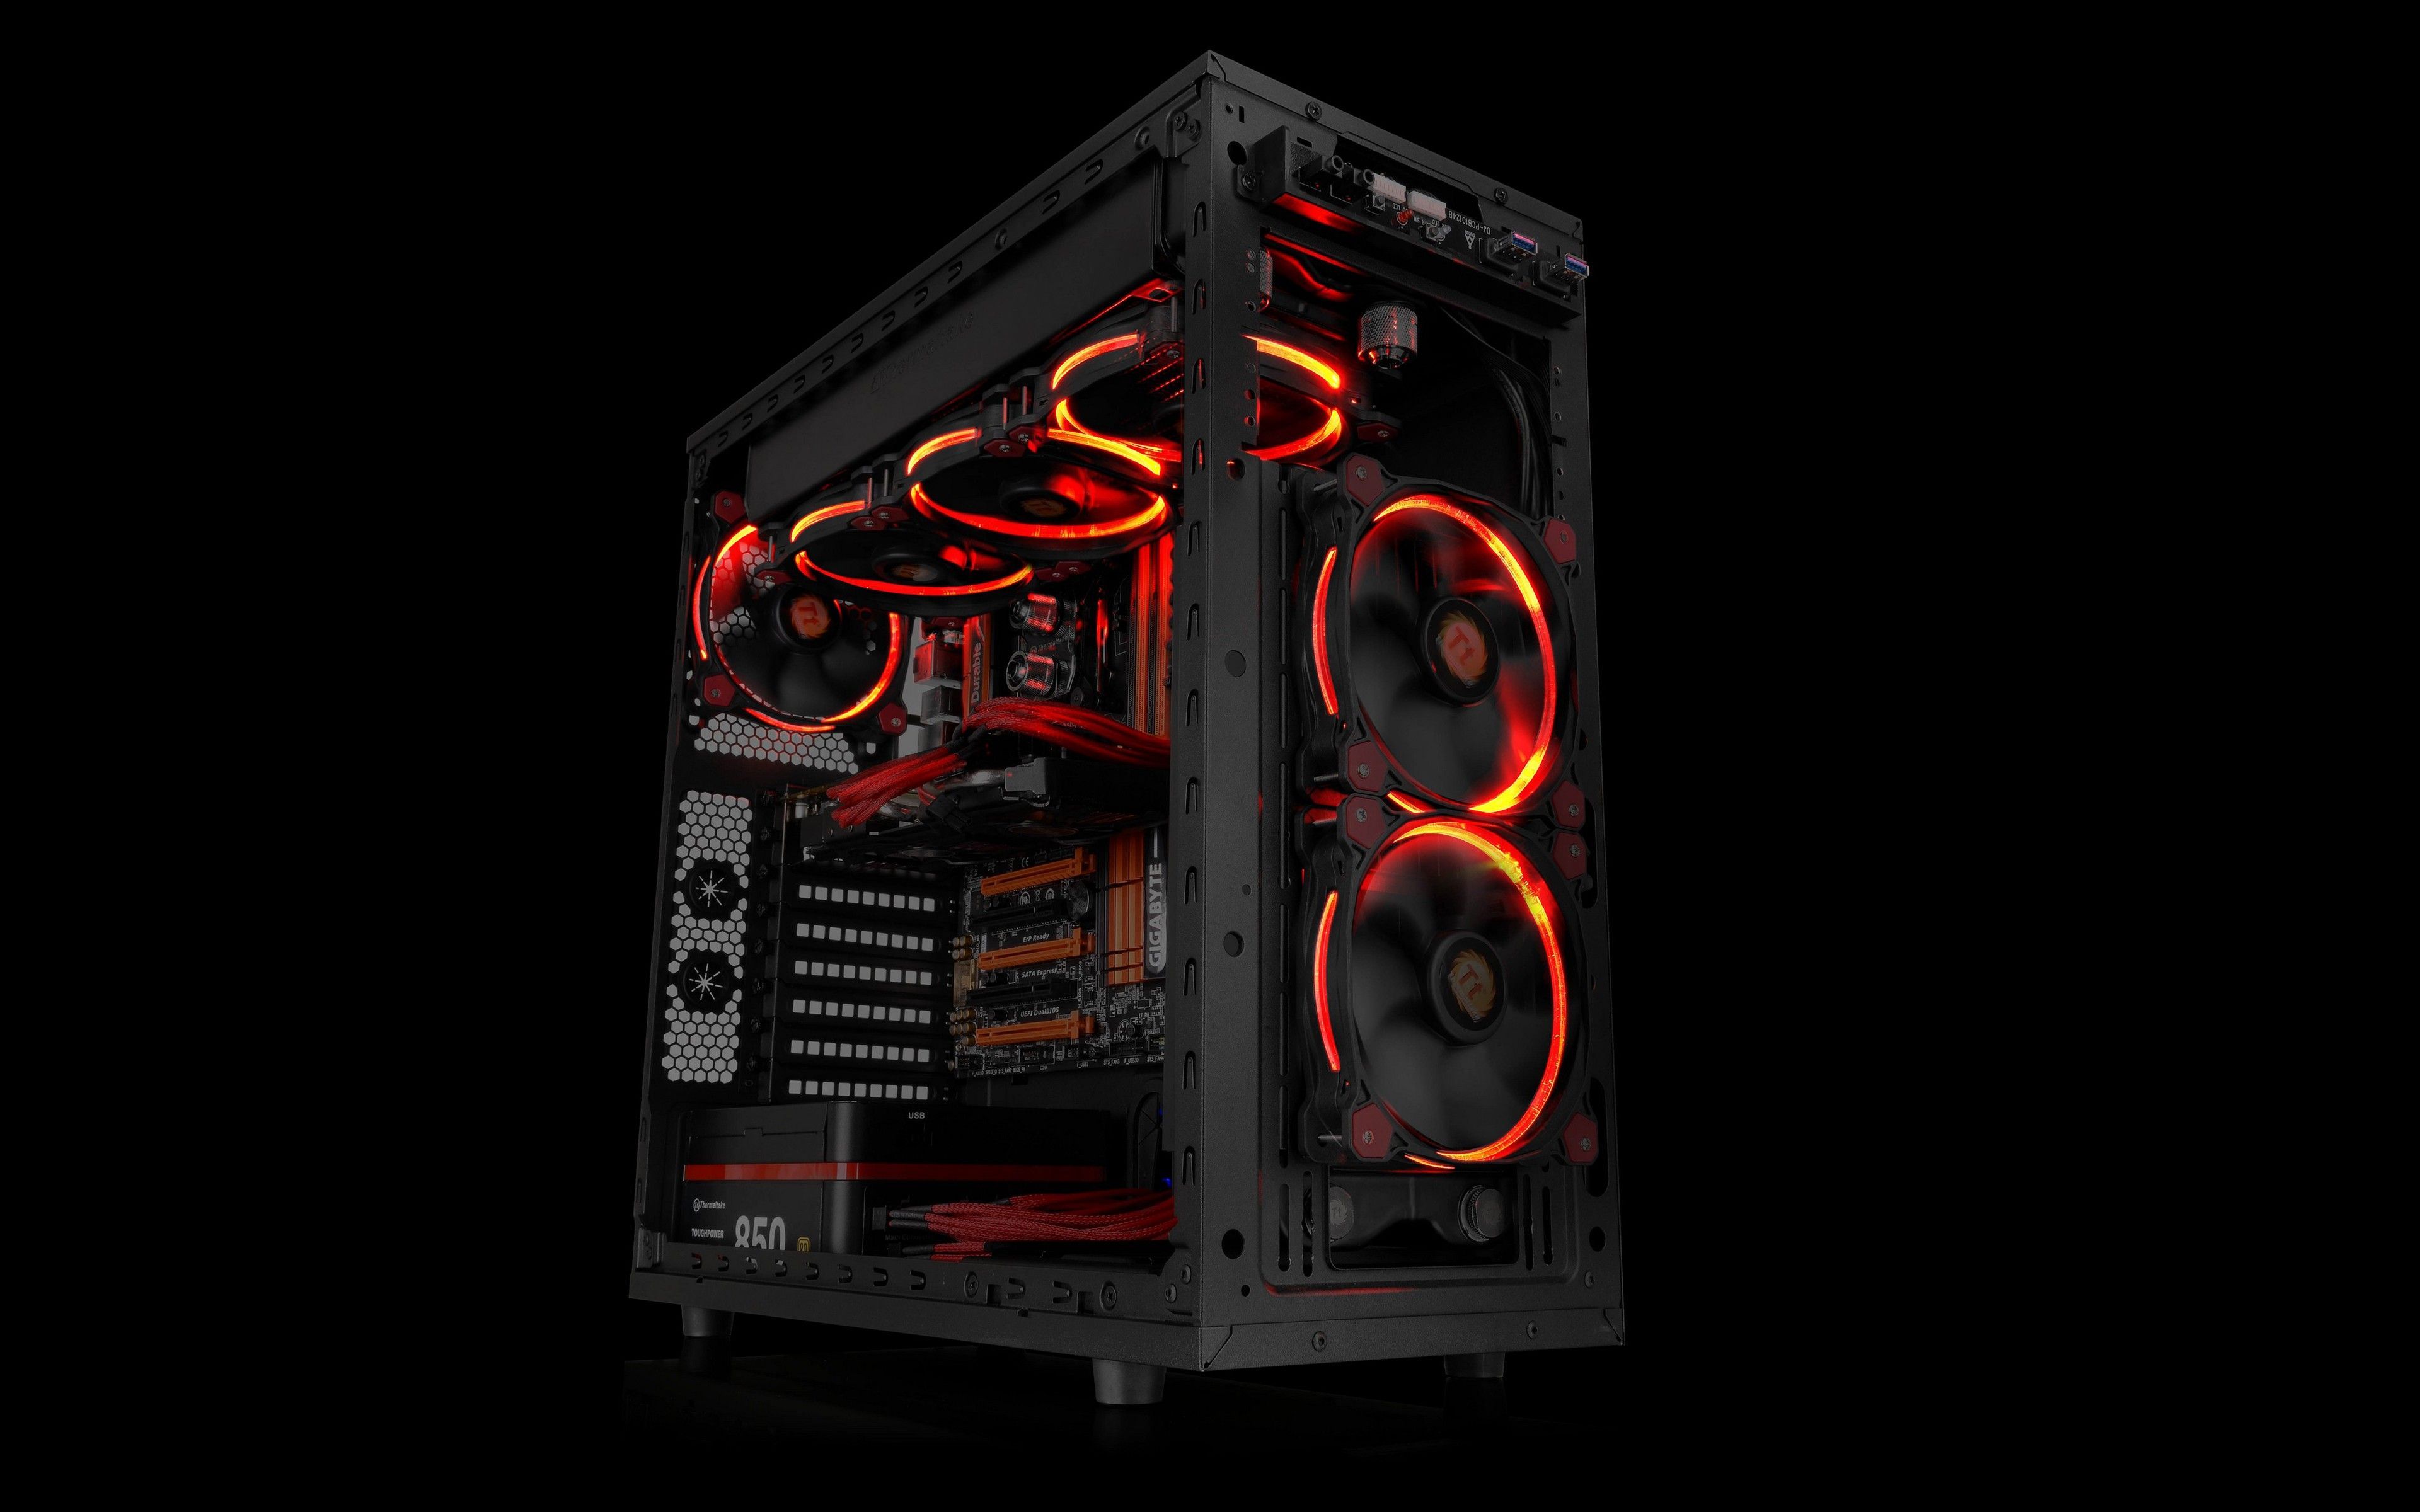 PC gaming, #computer, #PC cases, #technology, #Gigabyte, #hardware, # Thermaltake, #cooling fan, #simple background. Wallpap. Computer tower, Gaming pc, Pc cases